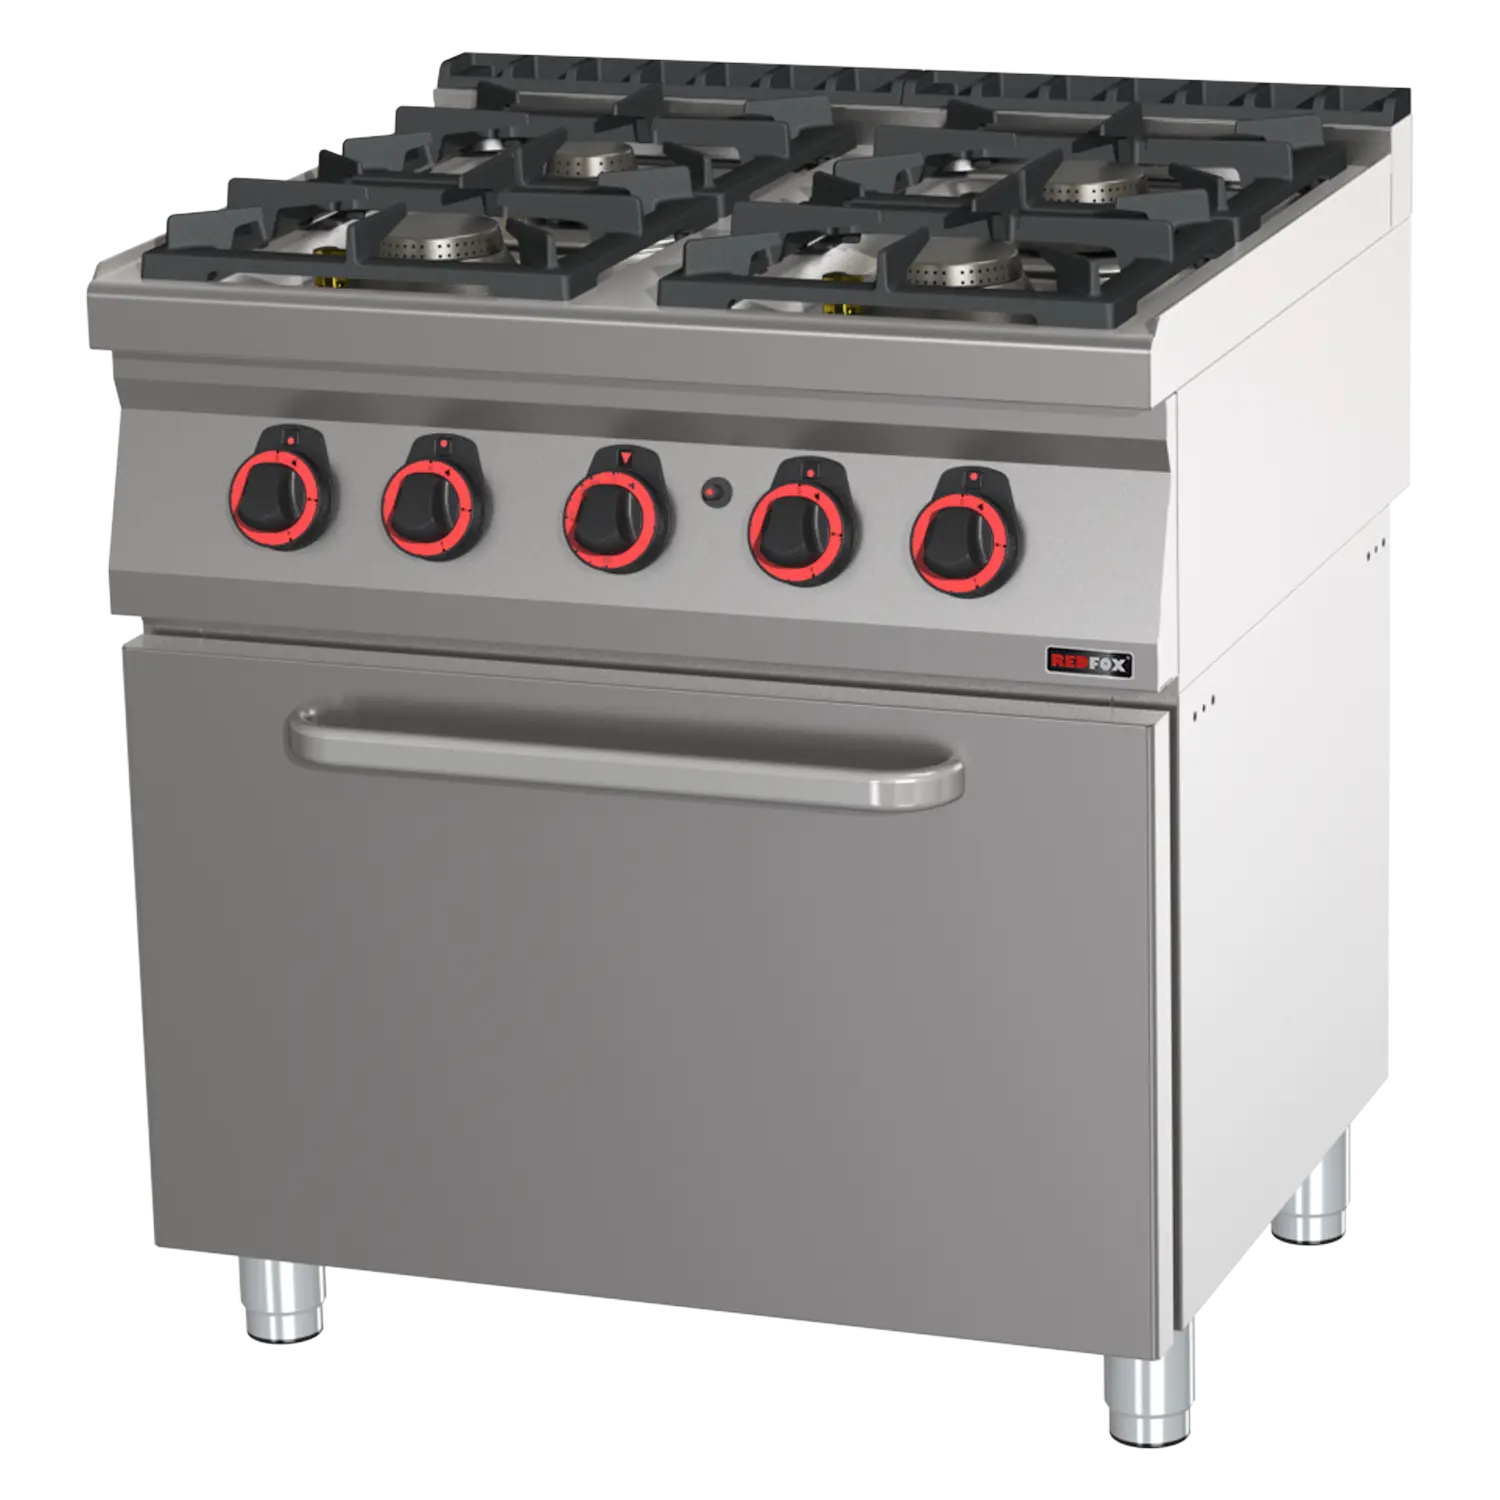 Cooking range gas with static gas oven GN 2/1 - 4x burner  | REDFOX - SPT 70/80 21 G